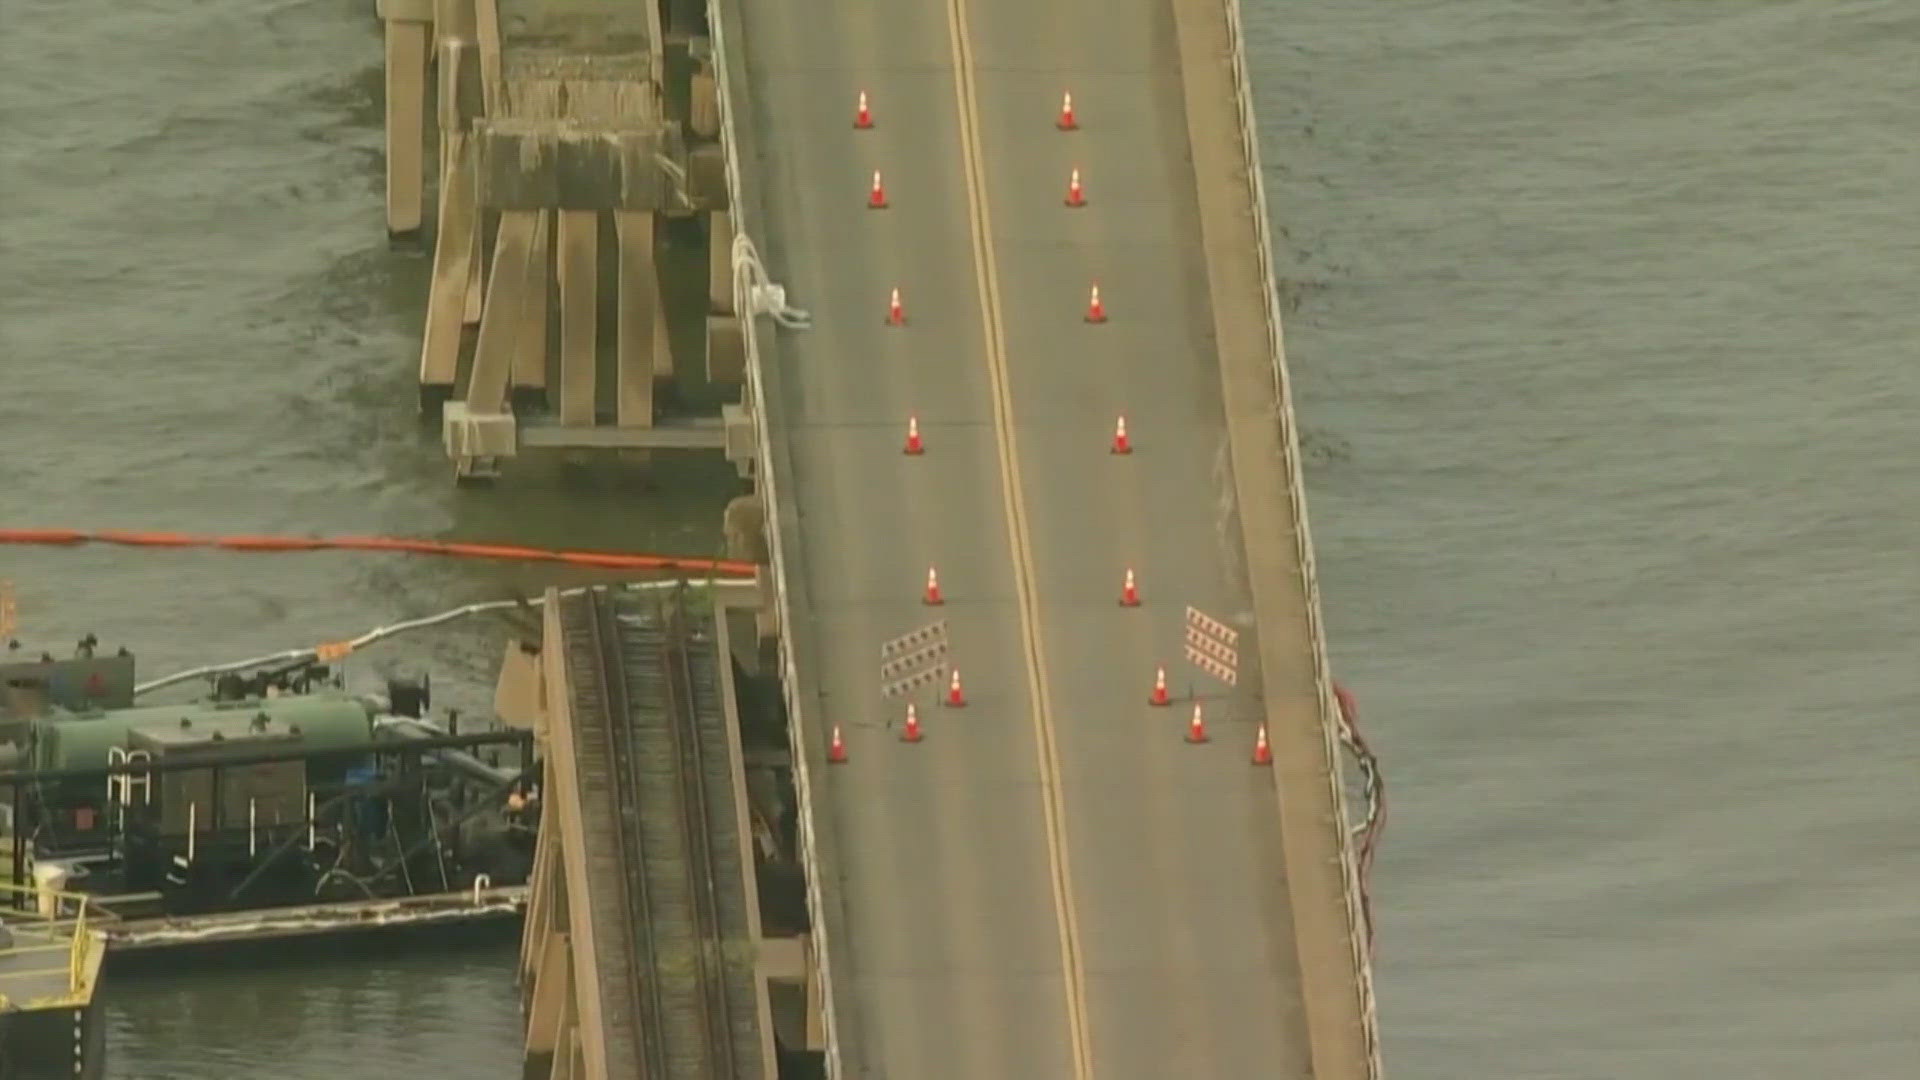 Officials say possibly 2,000 gallons of oil has spilt after barge crashed into Galveston bridge